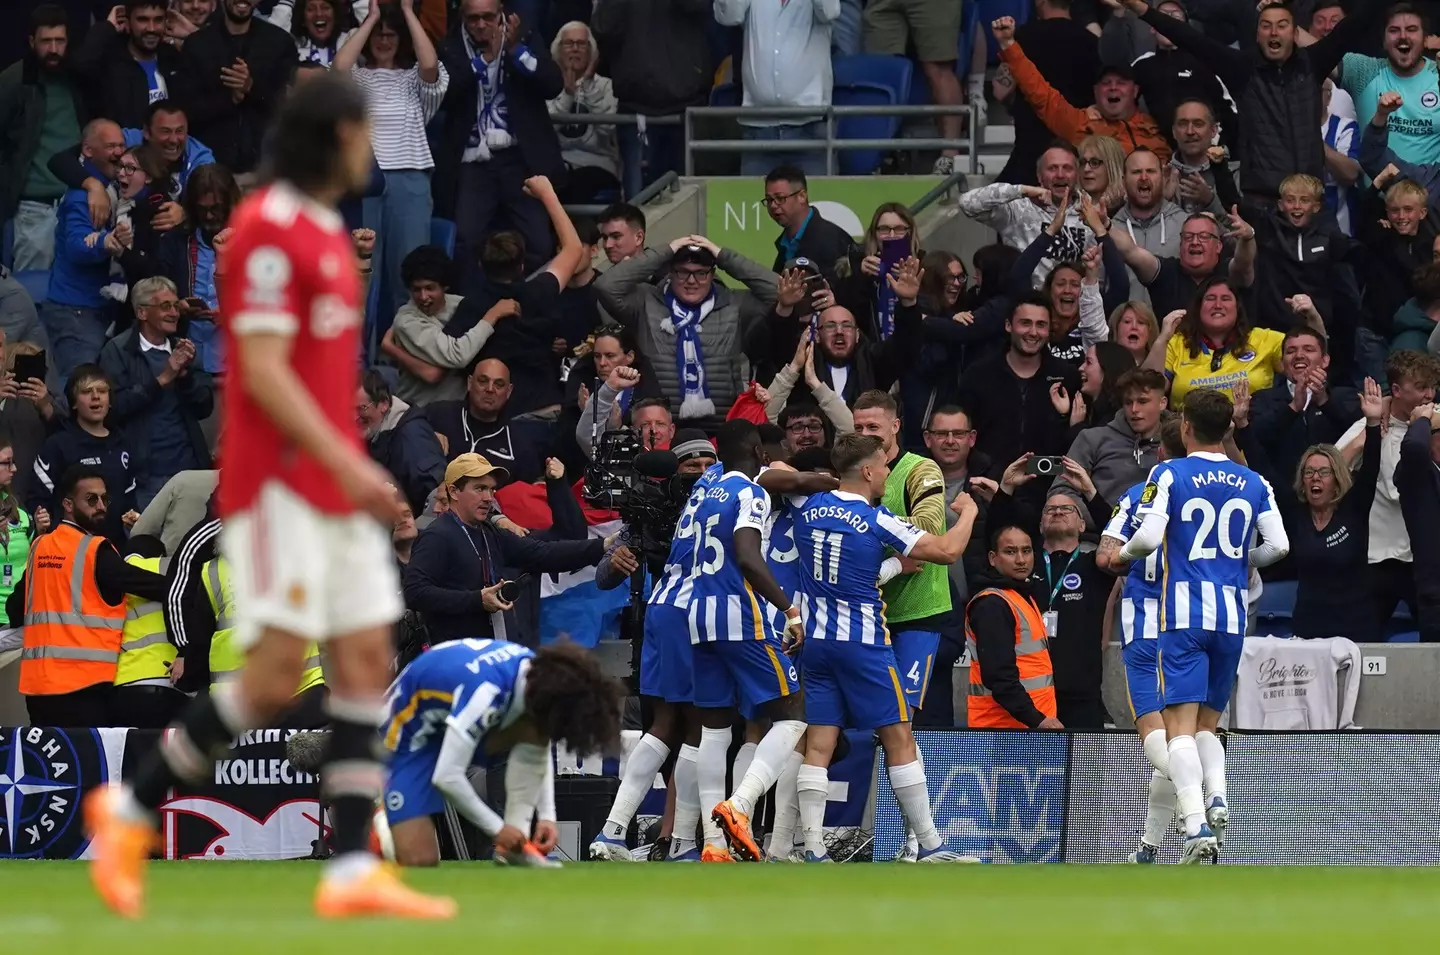 Brighton's battering of United show things haven't exactly improved. Image: PA Images